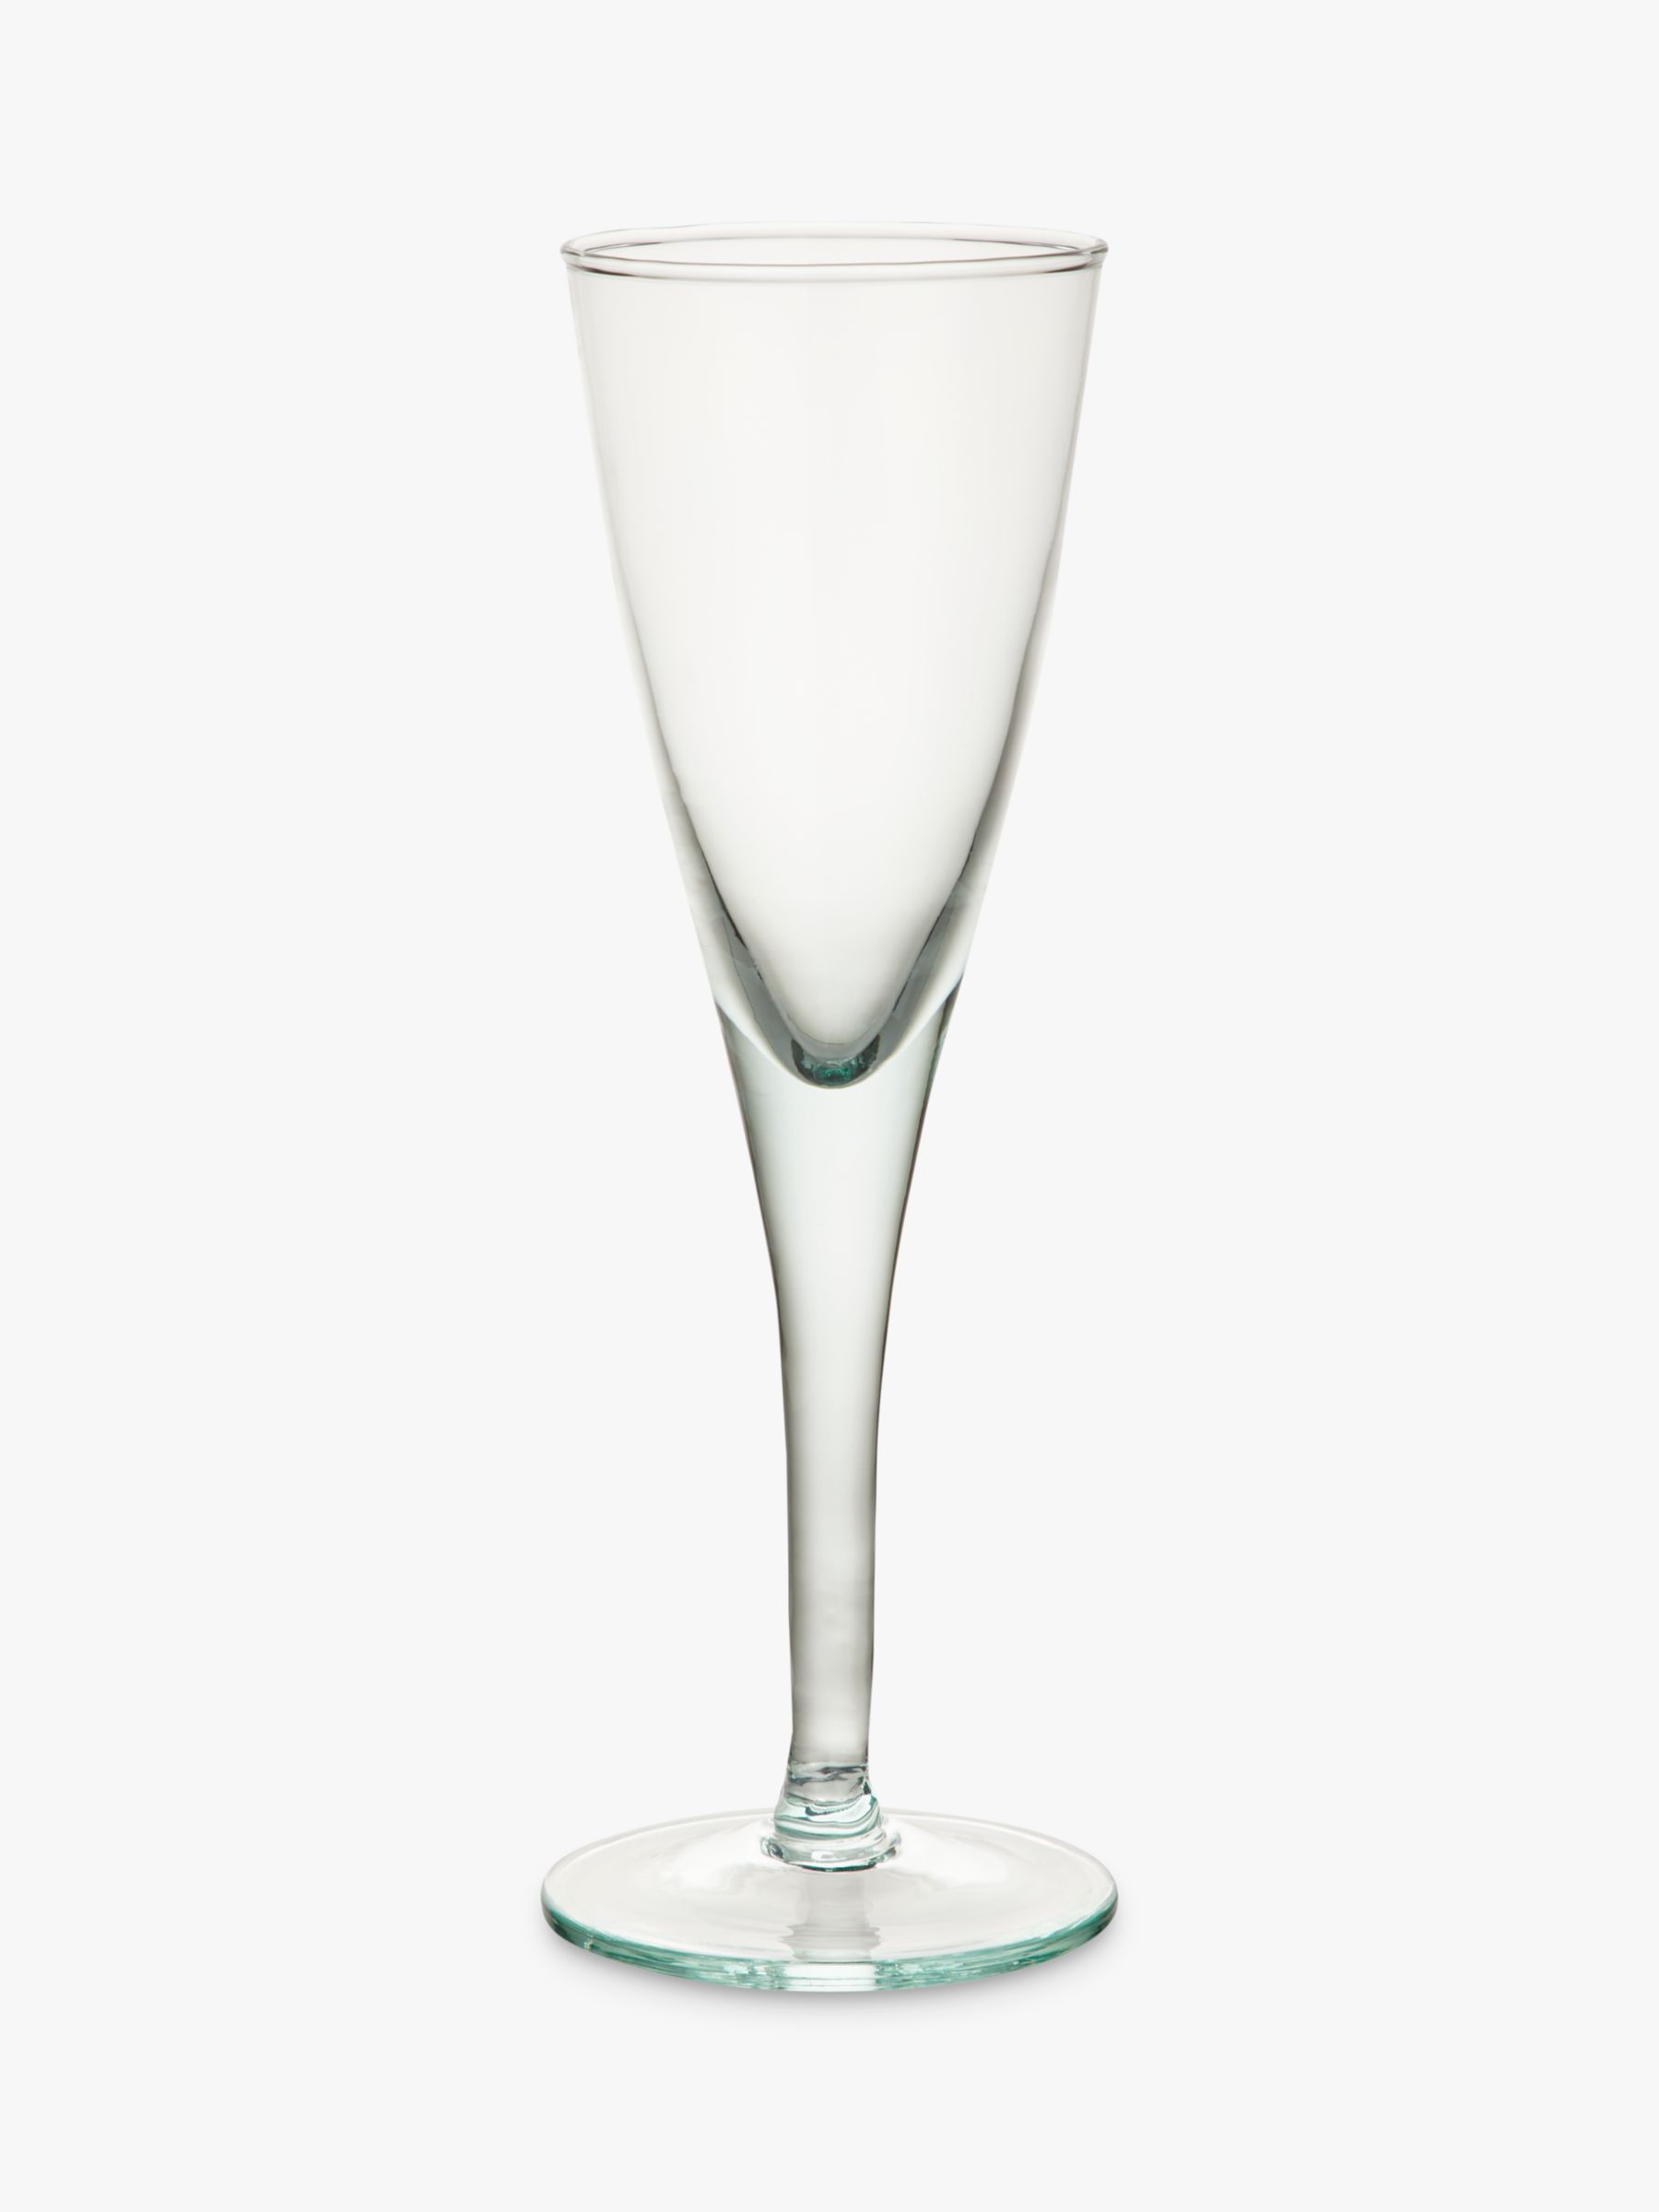 John Lewis & Partners Italian Recycled Glass Prosecco Flute, Clear, 270ml